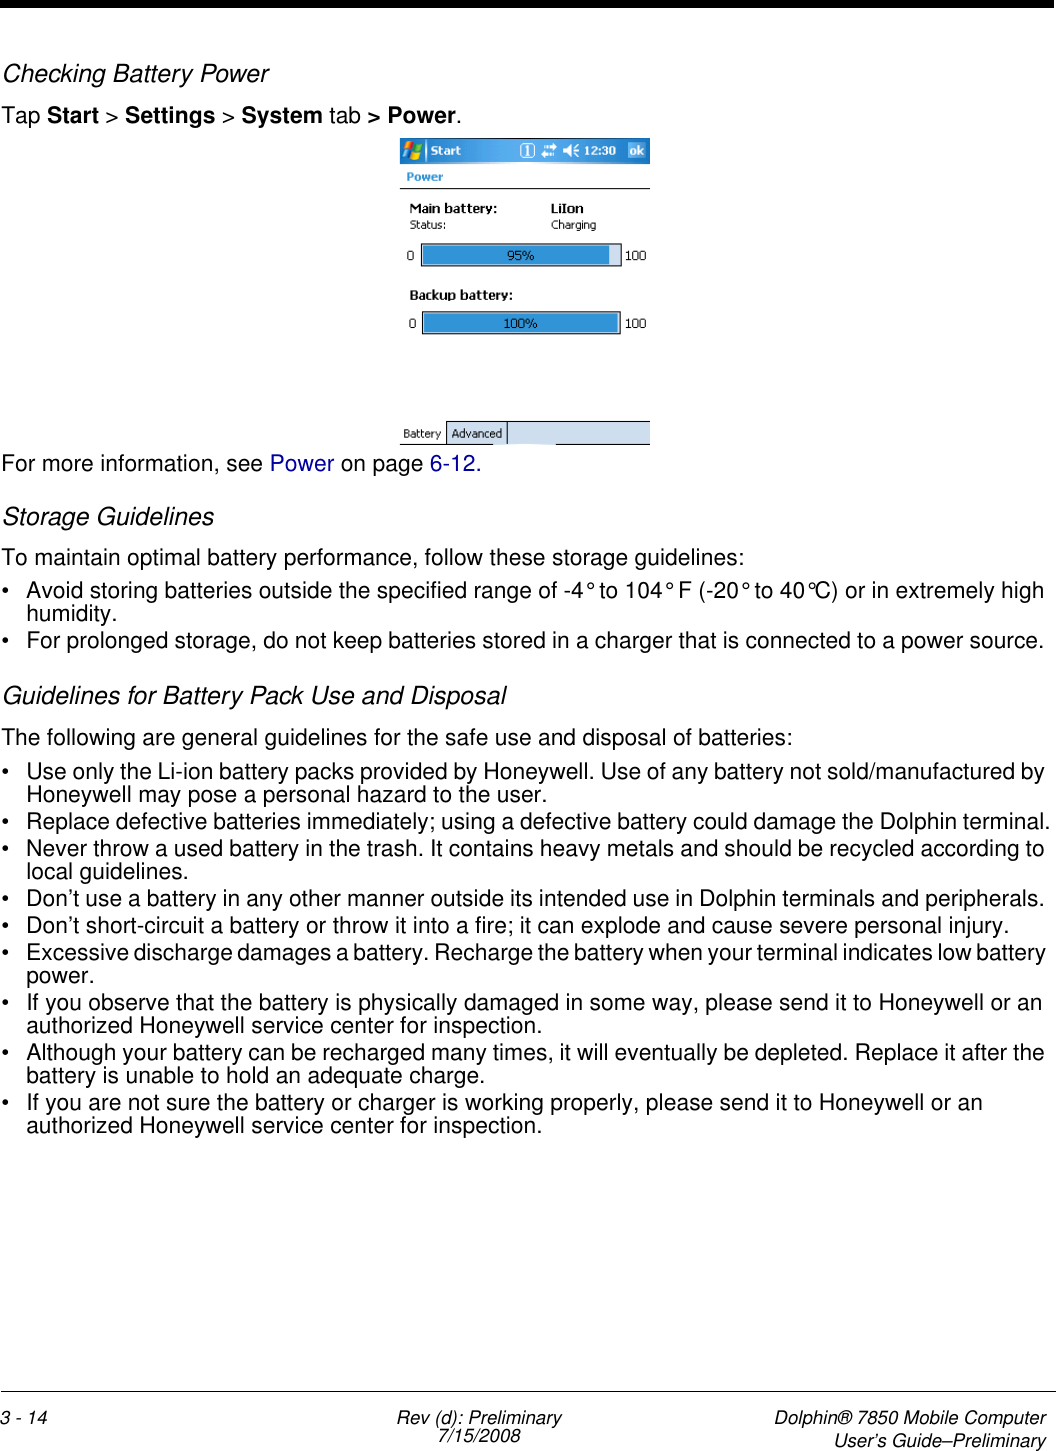 3 - 14 Rev (d): Preliminary7/15/2008 Dolphin® 7850 Mobile ComputerUser’s Guide–PreliminaryChecking Battery PowerTap Start &gt; Settings &gt; System tab &gt; Power.   For more information, see Power on page 6-12.Storage GuidelinesTo maintain optimal battery performance, follow these storage guidelines:• Avoid storing batteries outside the specified range of -4° to 104° F (-20° to 40°C) or in extremely high humidity.• For prolonged storage, do not keep batteries stored in a charger that is connected to a power source. Guidelines for Battery Pack Use and DisposalThe following are general guidelines for the safe use and disposal of batteries:• Use only the Li-ion battery packs provided by Honeywell. Use of any battery not sold/manufactured by Honeywell may pose a personal hazard to the user.• Replace defective batteries immediately; using a defective battery could damage the Dolphin terminal.• Never throw a used battery in the trash. It contains heavy metals and should be recycled according to local guidelines. • Don’t use a battery in any other manner outside its intended use in Dolphin terminals and peripherals. • Don’t short-circuit a battery or throw it into a fire; it can explode and cause severe personal injury.• Excessive discharge damages a battery. Recharge the battery when your terminal indicates low battery power.• If you observe that the battery is physically damaged in some way, please send it to Honeywell or an authorized Honeywell service center for inspection.• Although your battery can be recharged many times, it will eventually be depleted. Replace it after the battery is unable to hold an adequate charge.• If you are not sure the battery or charger is working properly, please send it to Honeywell or an authorized Honeywell service center for inspection.